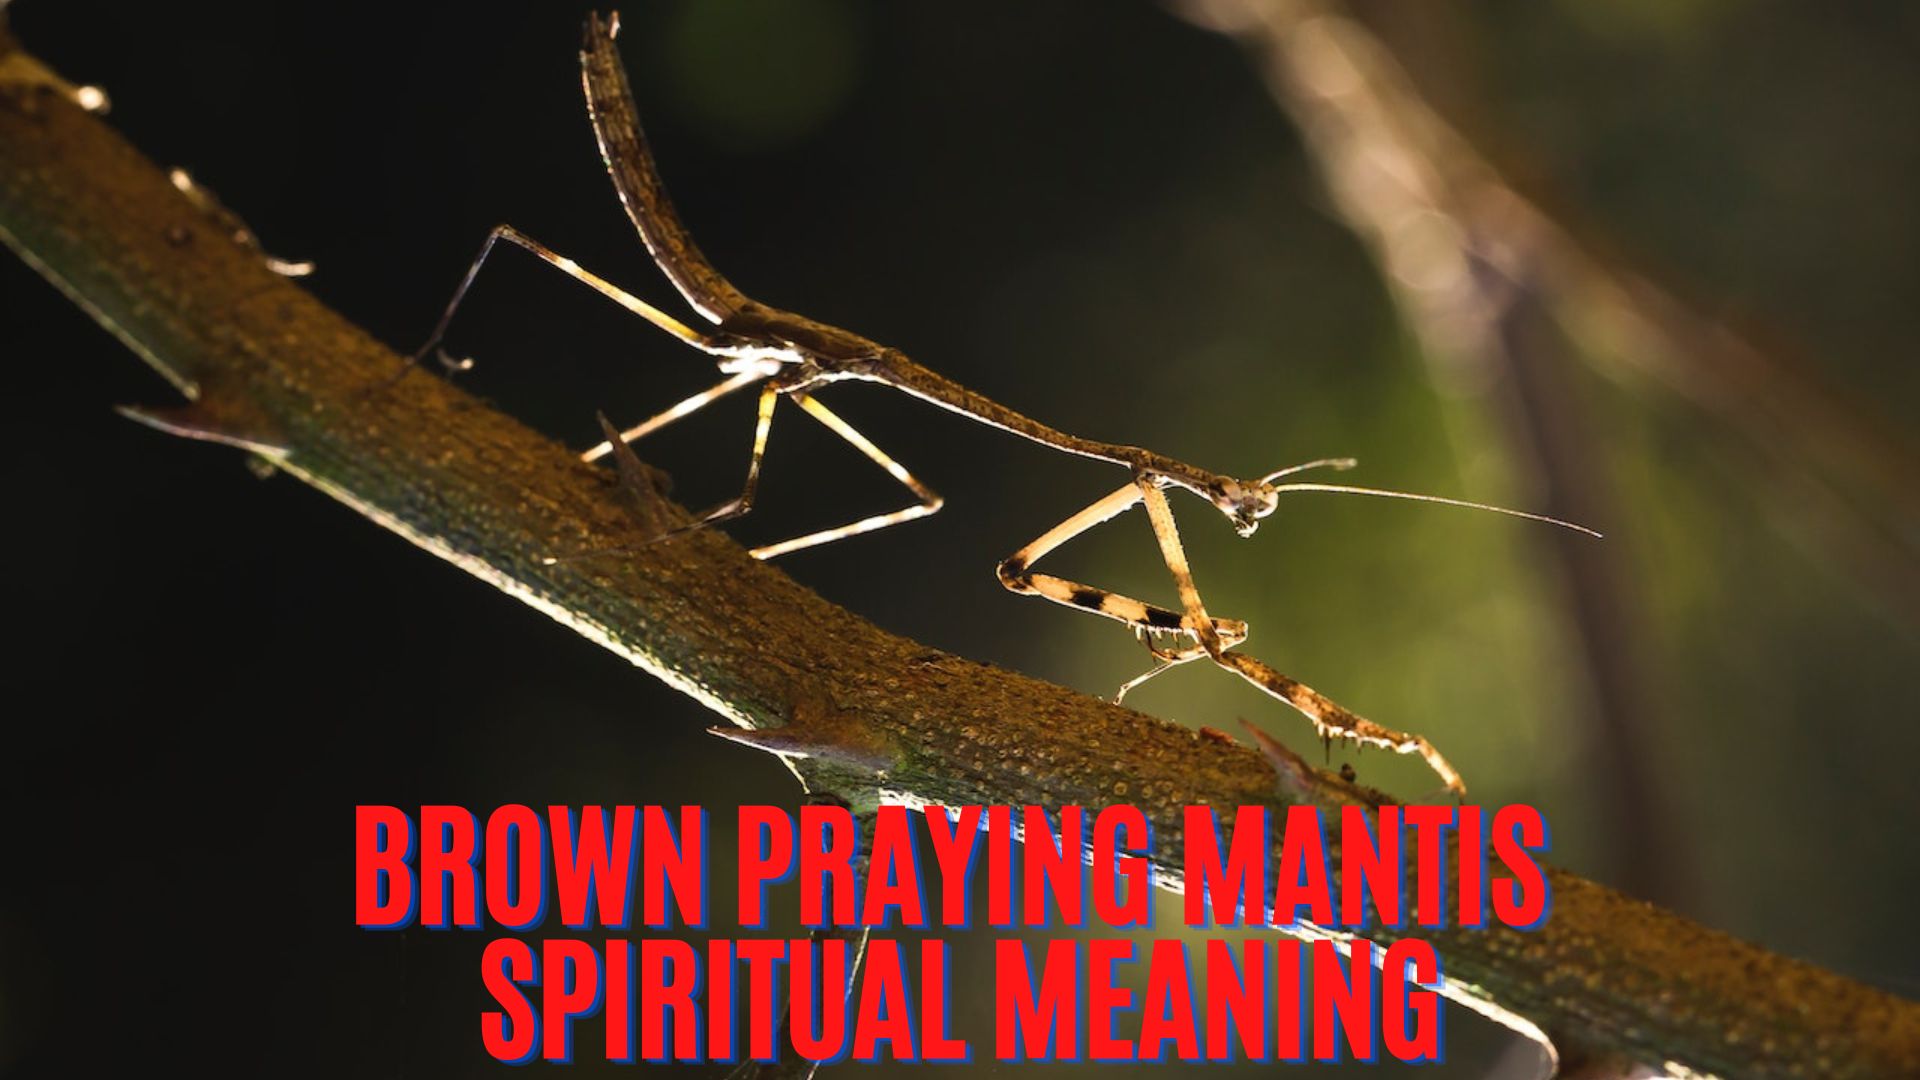 Brown Praying Mantis Spiritual Meaning - Connecting With Your Higher Self